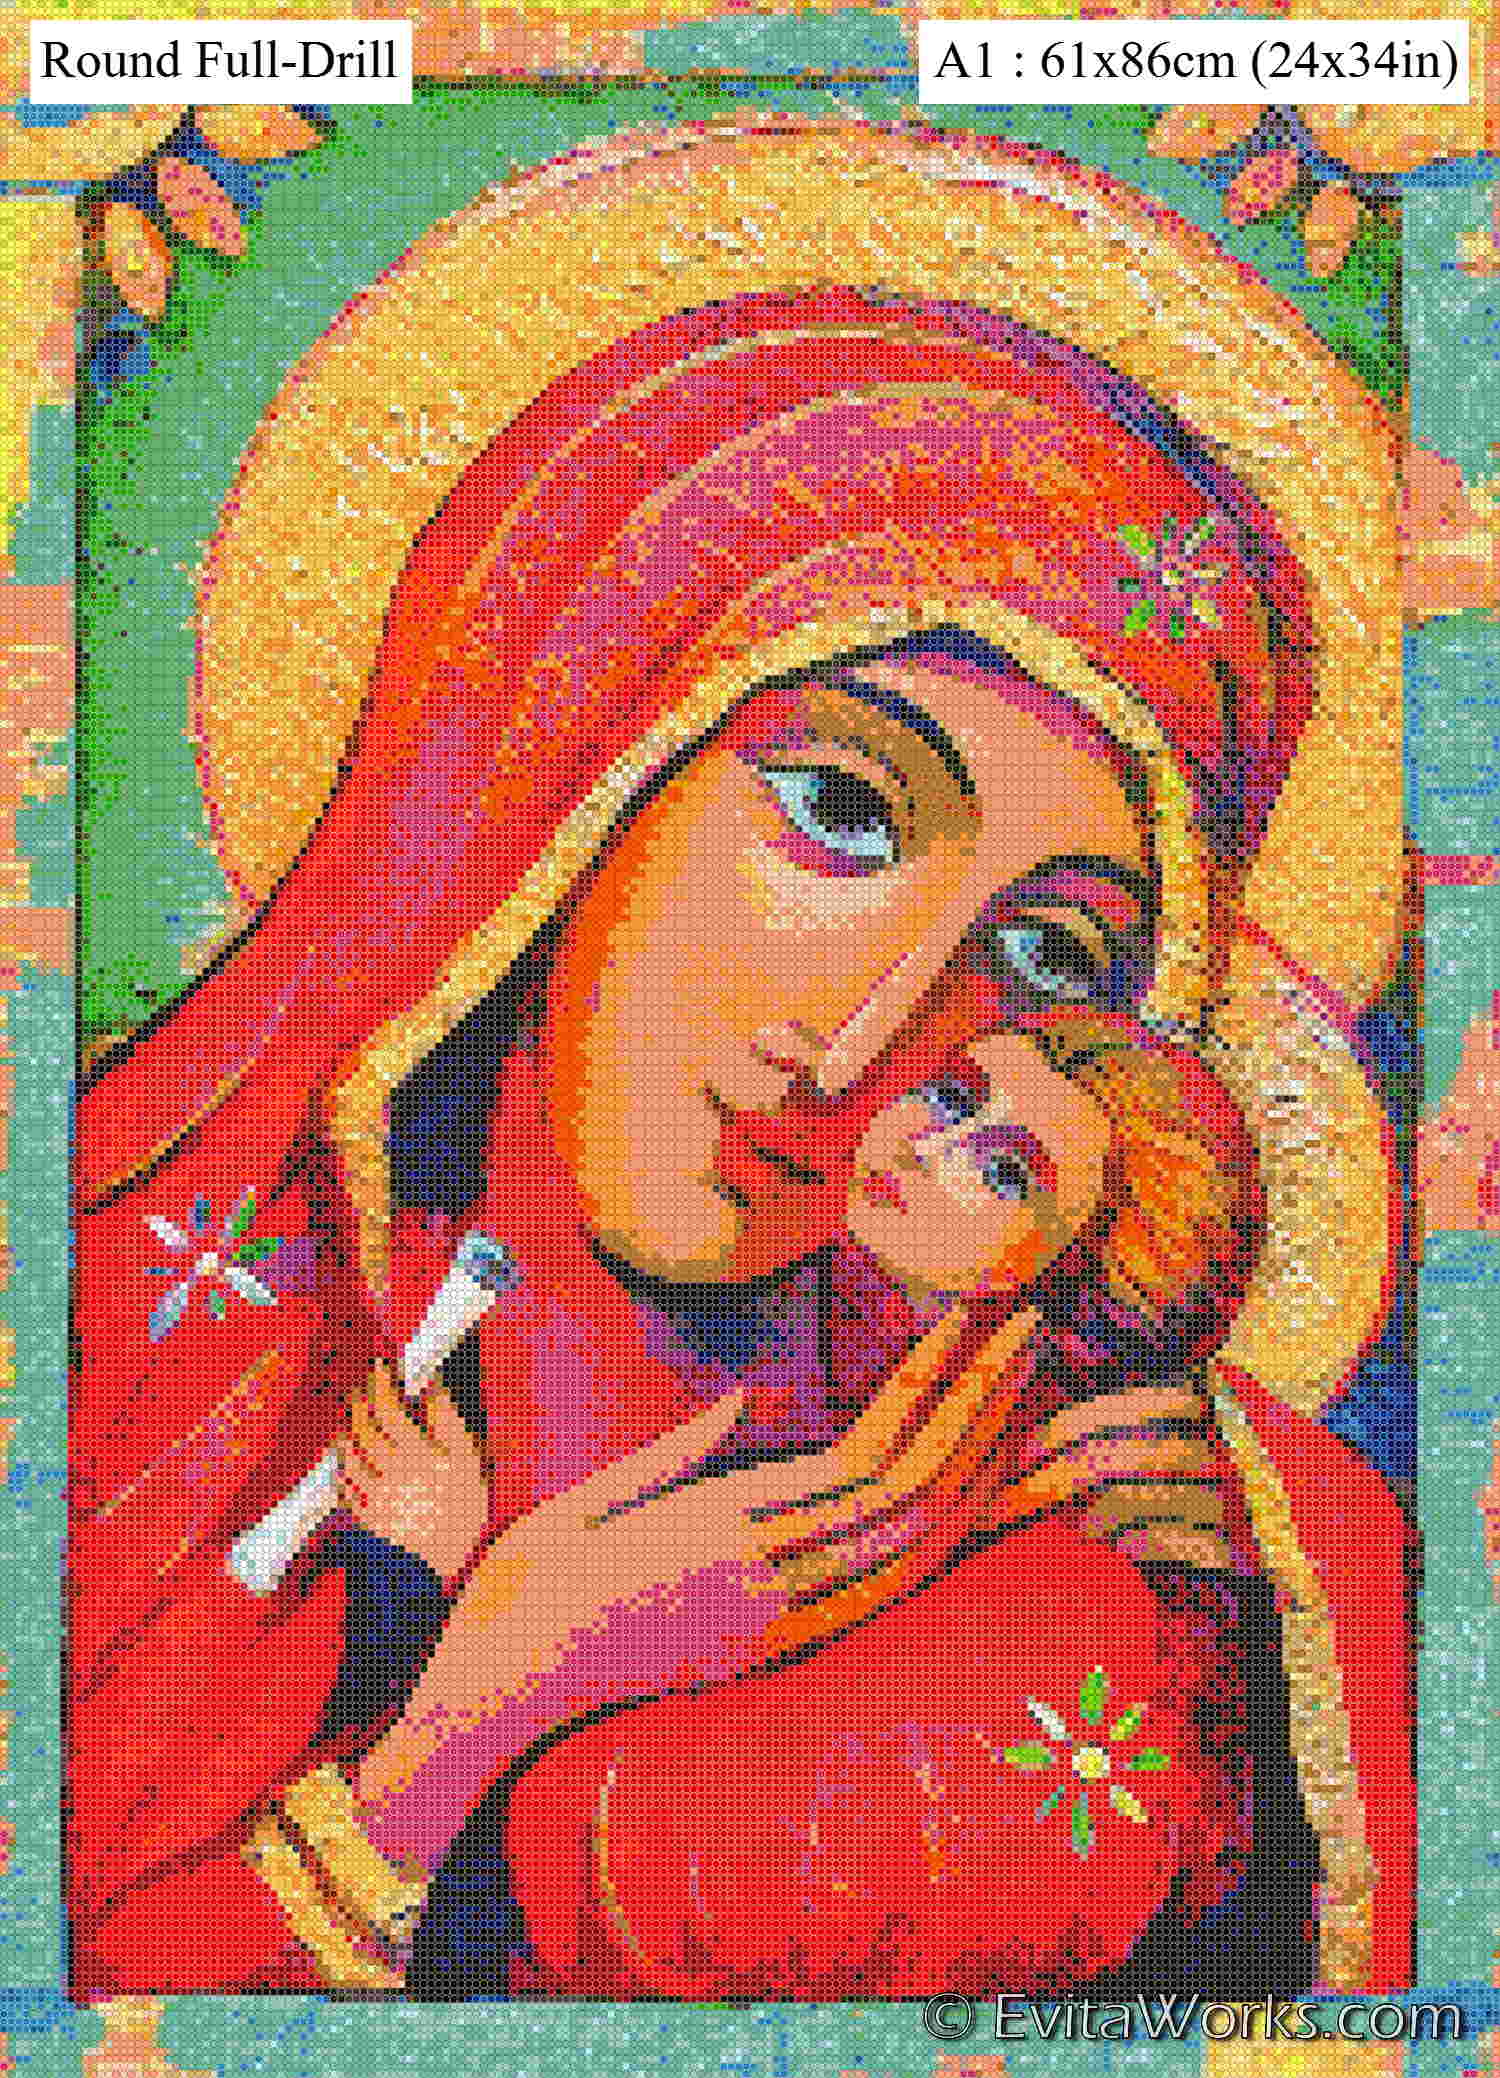 ea mother and child icon a1rfd ~ EvitaWorks